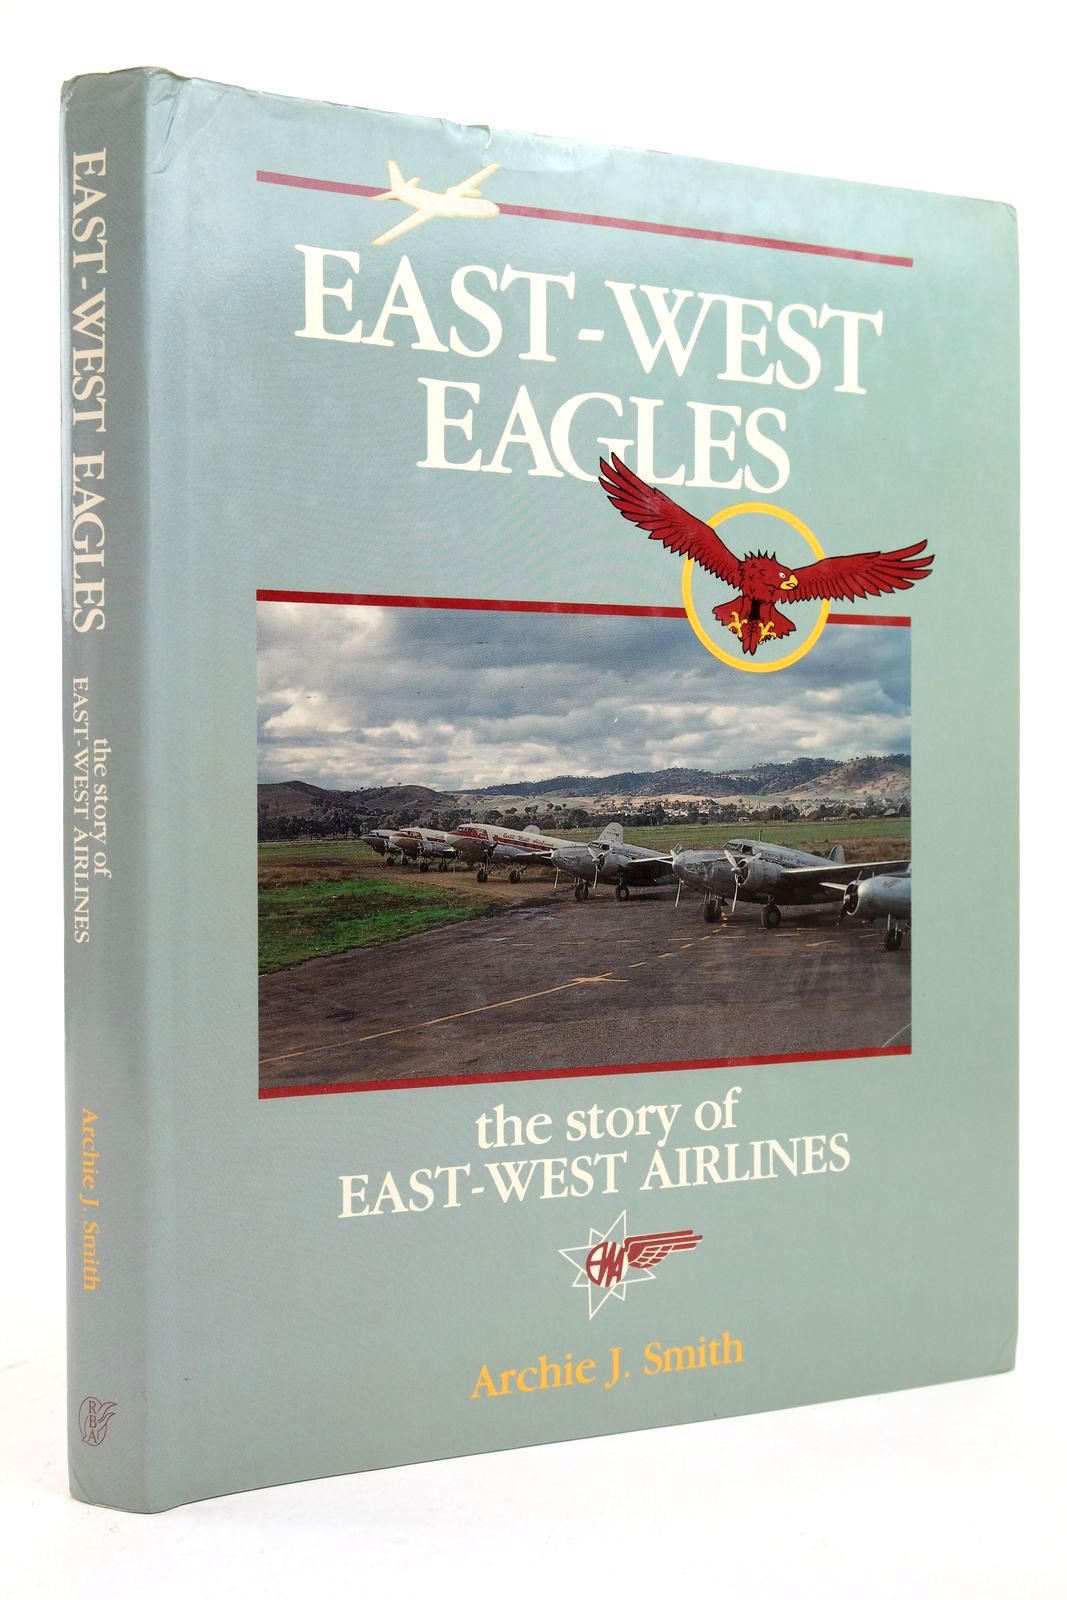 Photo of EAST-WEST EAGLES THE STORY OF EAST-WEST AIRLINES- Stock Number: 2139417